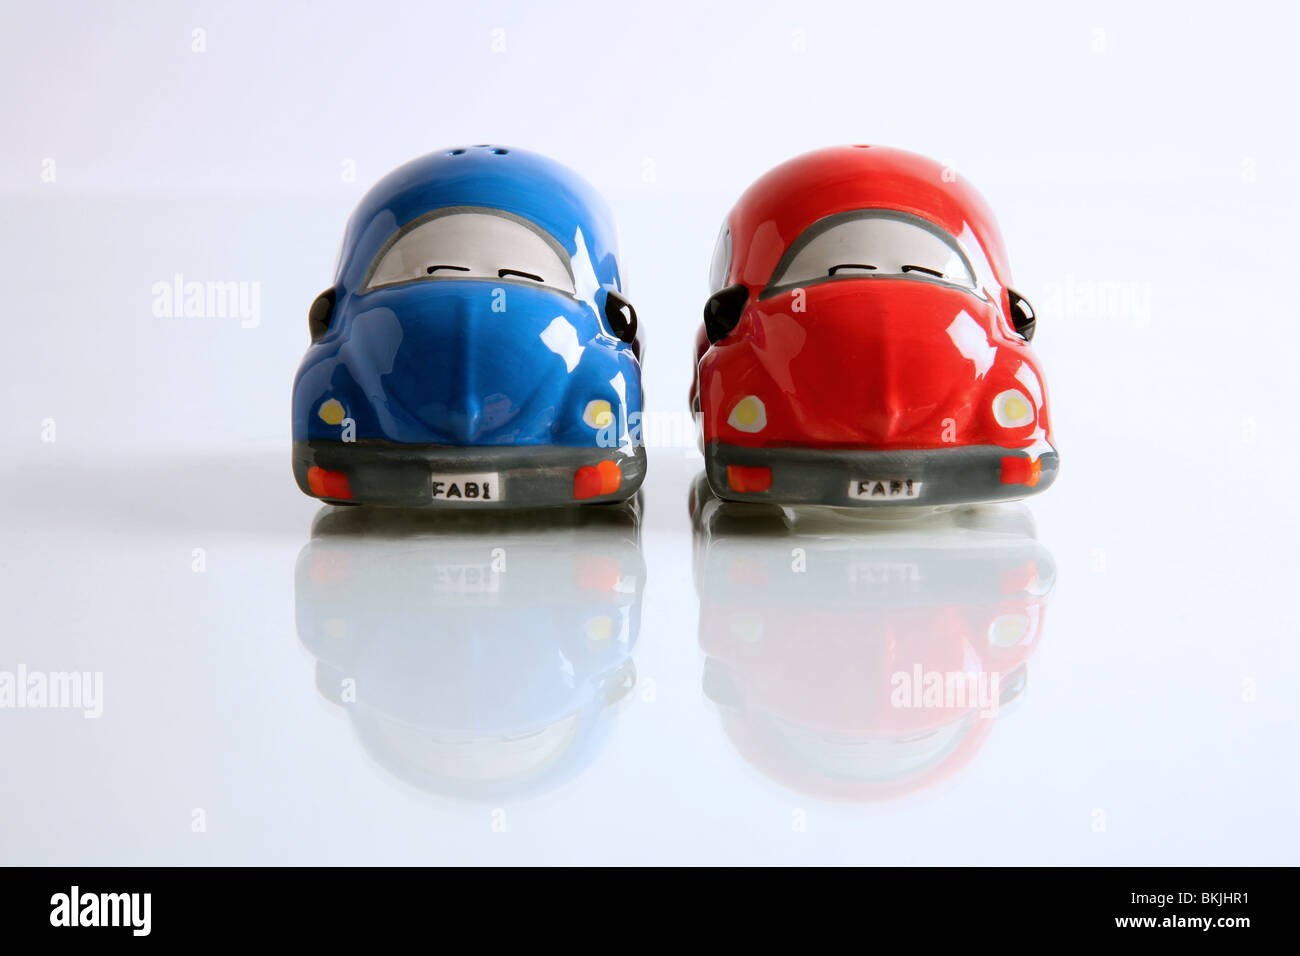 A photograph of a salt and pepper pot shaped as cars, vaguely in the shape of Volkswagen Beetles. Photographed head on. Stock Photo